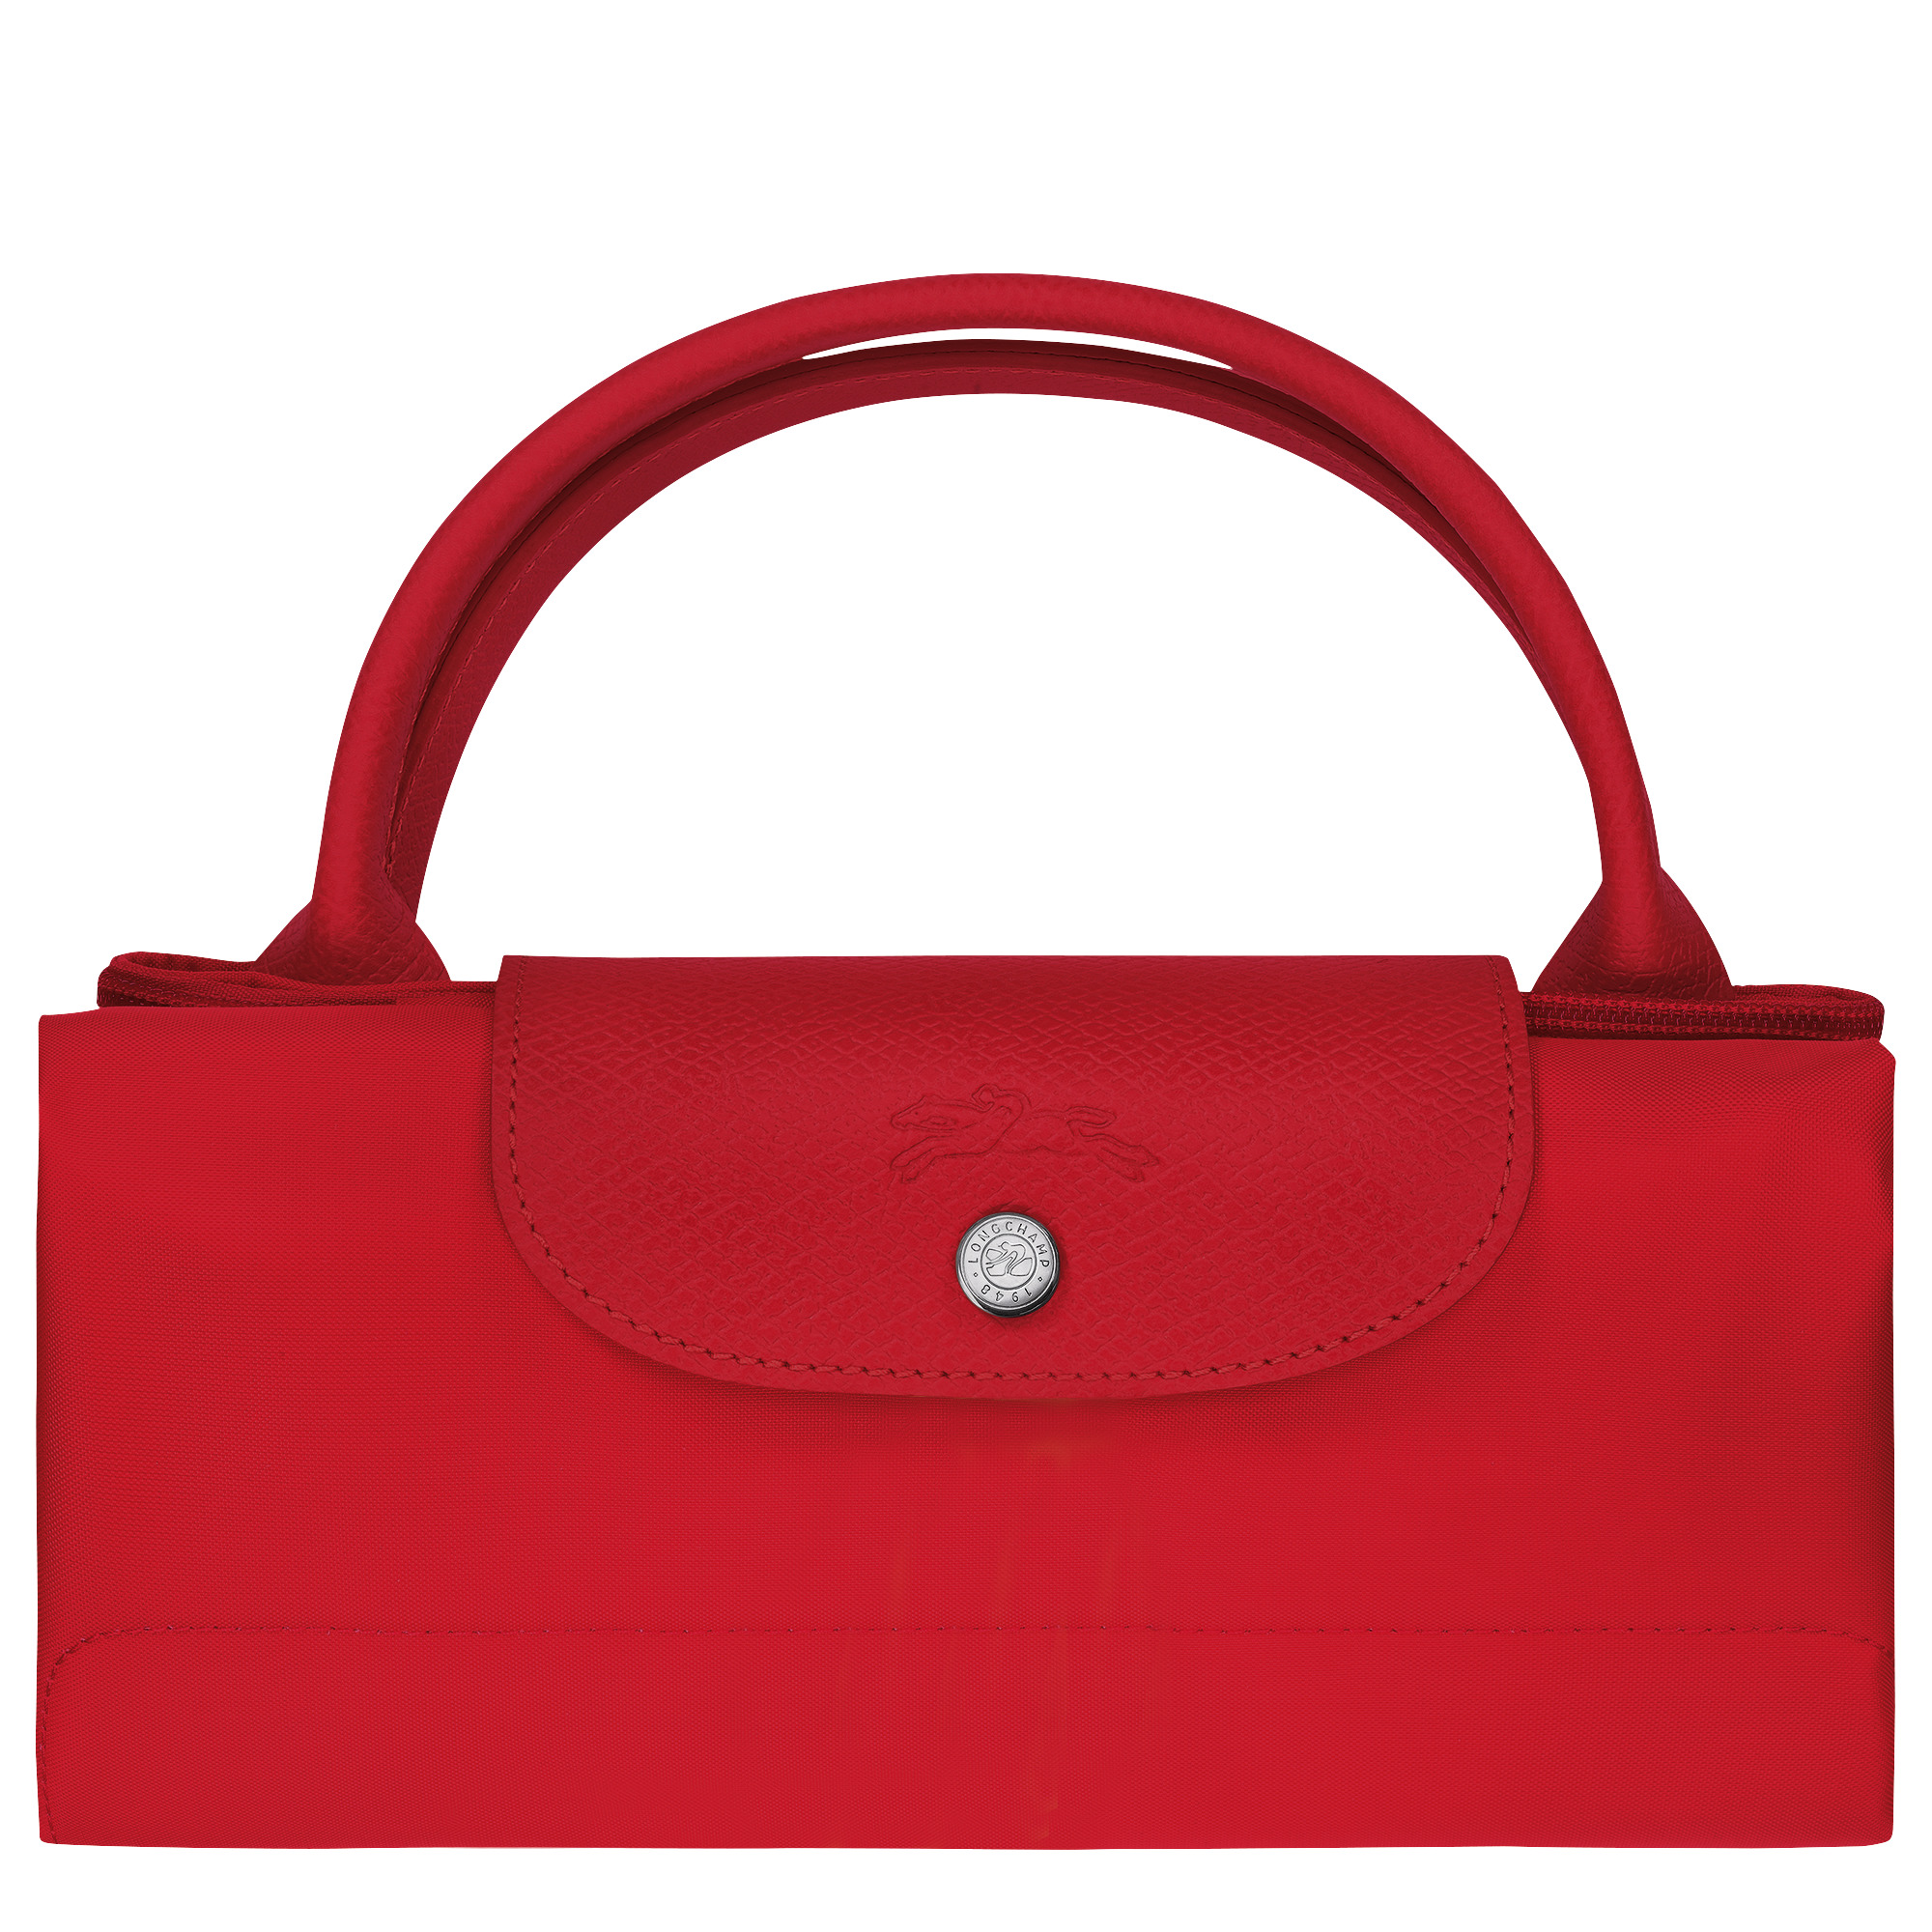 Le Pliage Green M Travel bag Tomato - Recycled canvas - 5